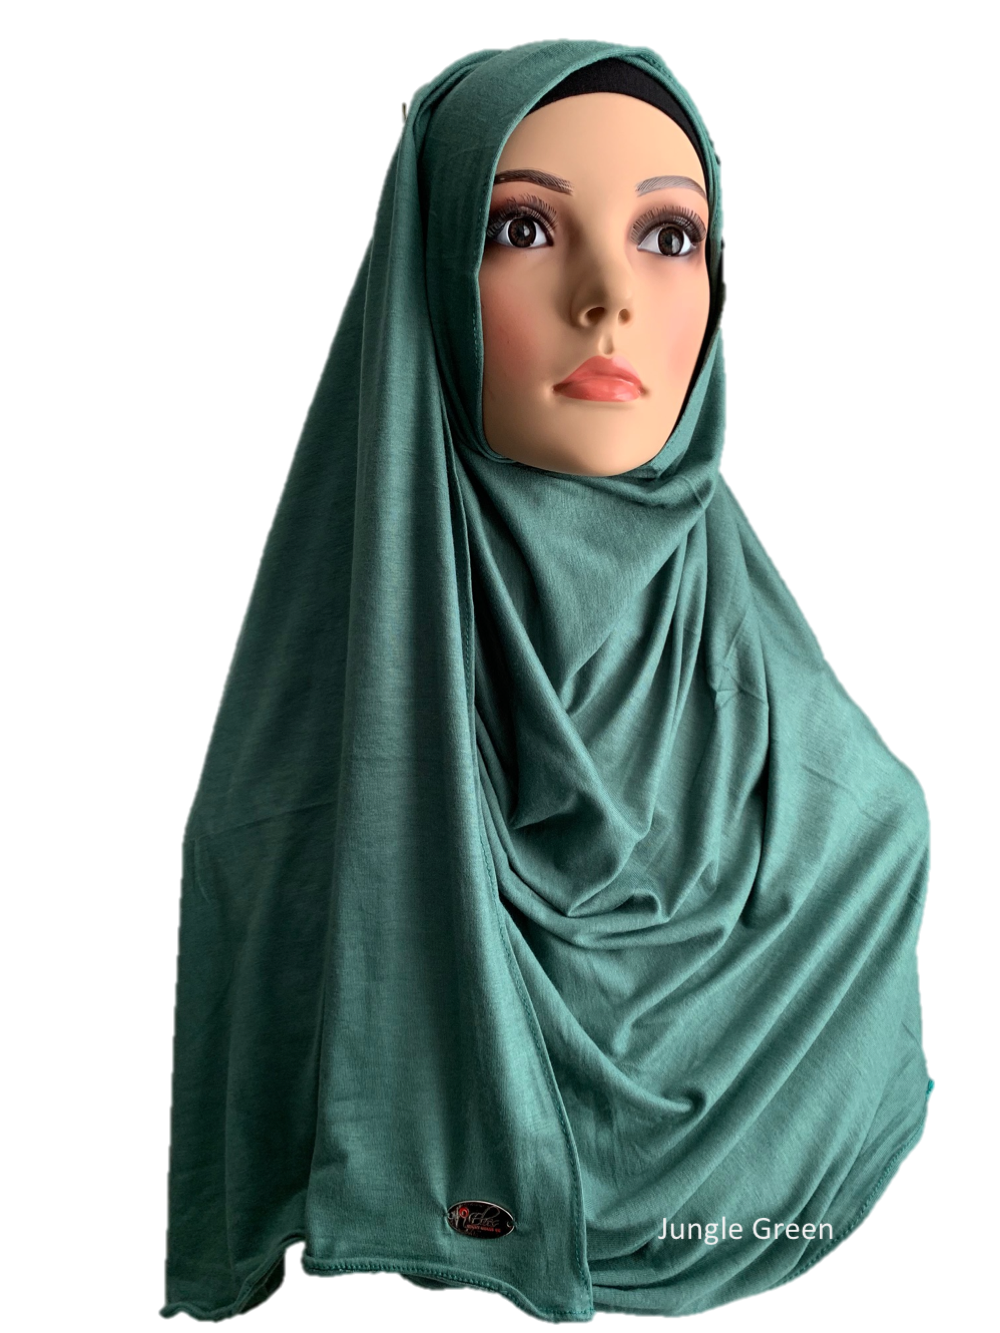 Jungle Green stretchy (COT) instant hijab SF